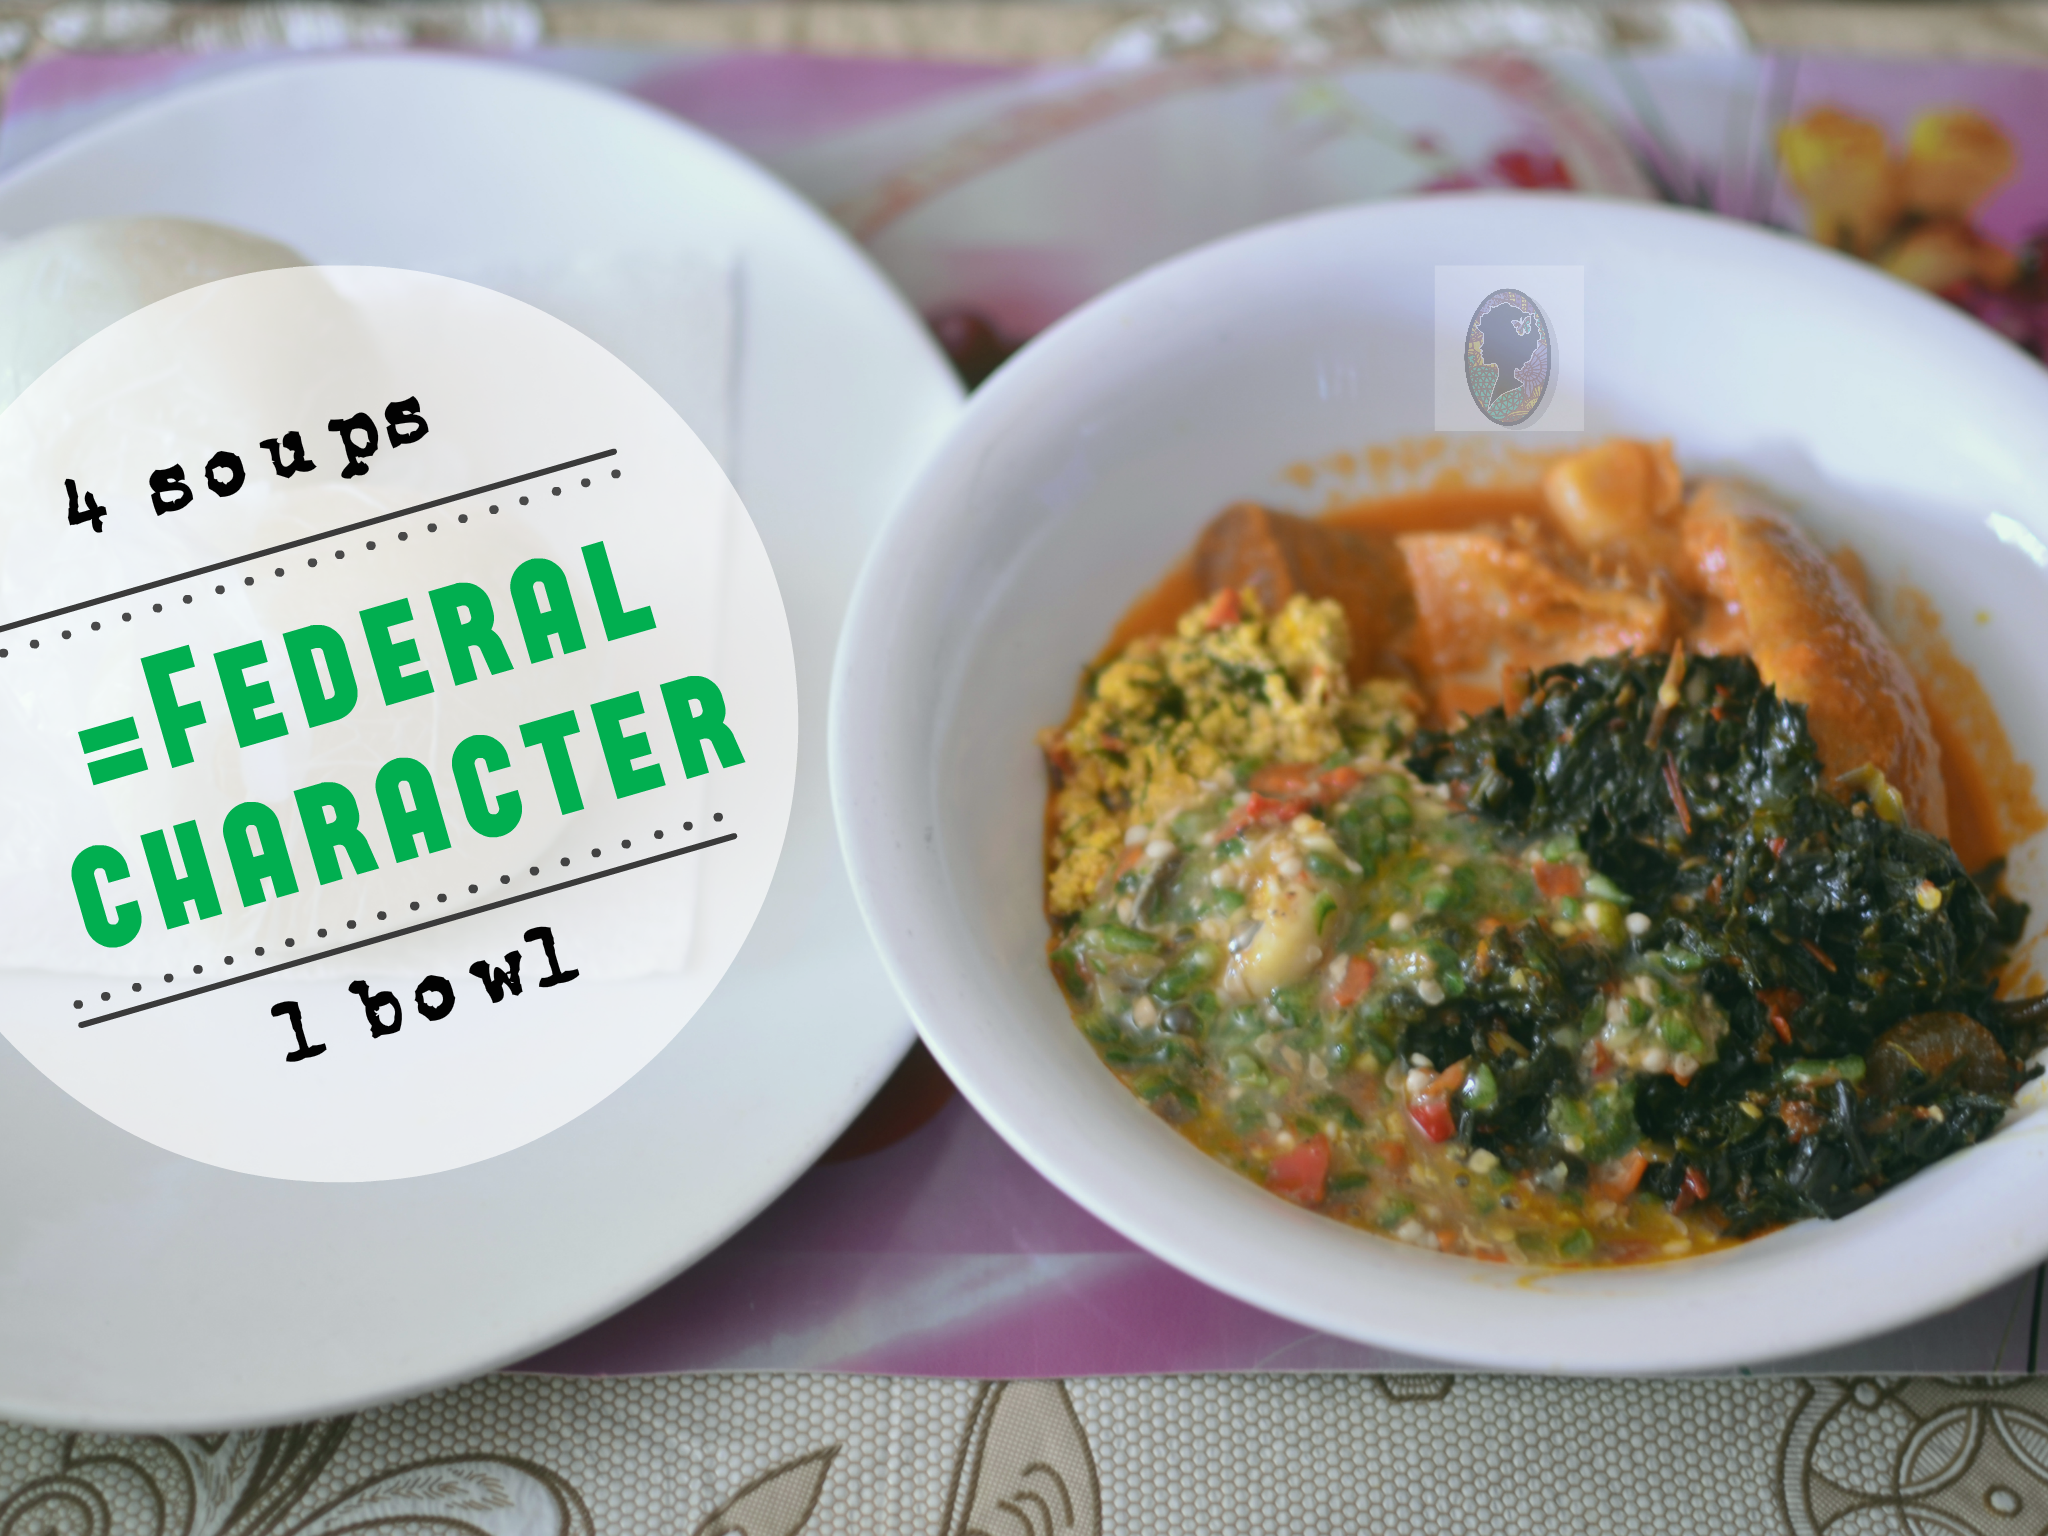 the-soup-s-called-federal-character-kitchen-butterfly